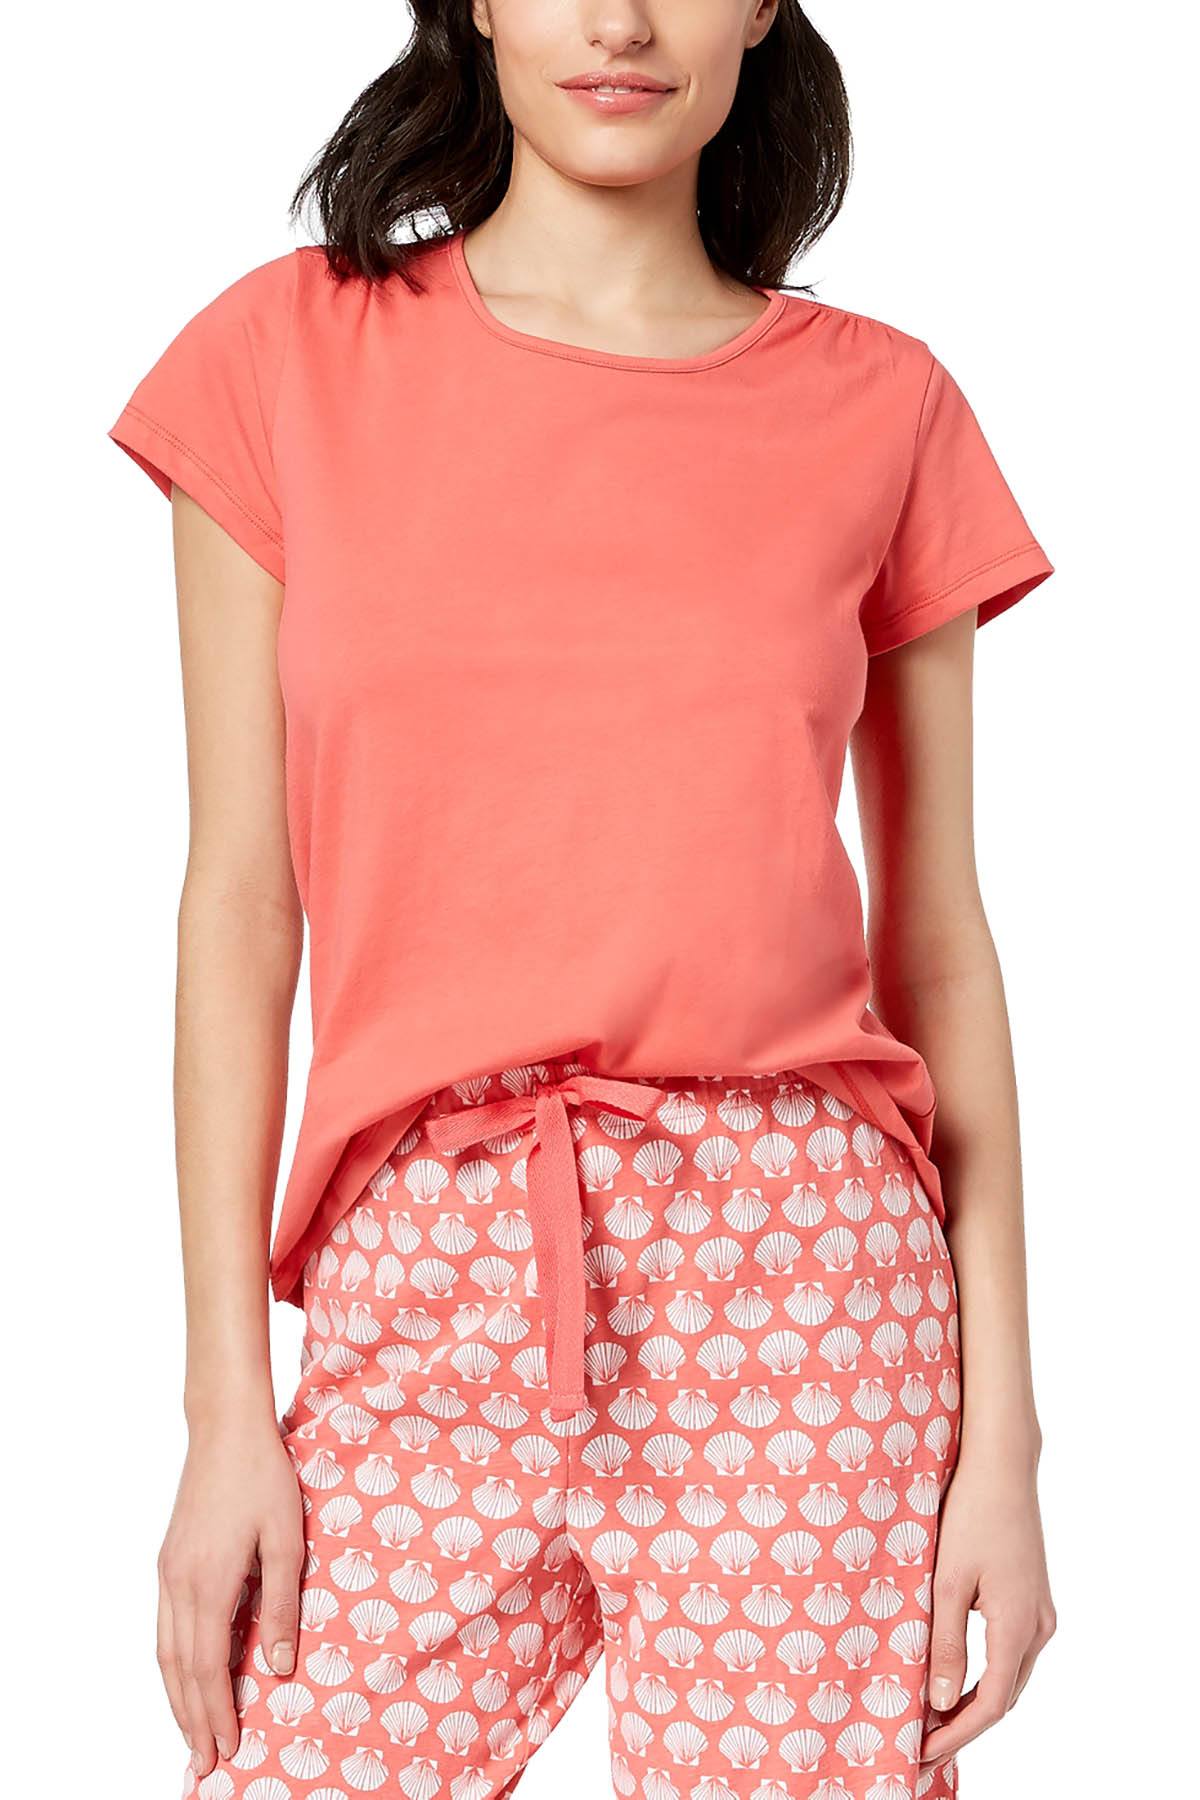 Charter Club Intimates Peony-Coral Short-Sleeve Cotton Tee